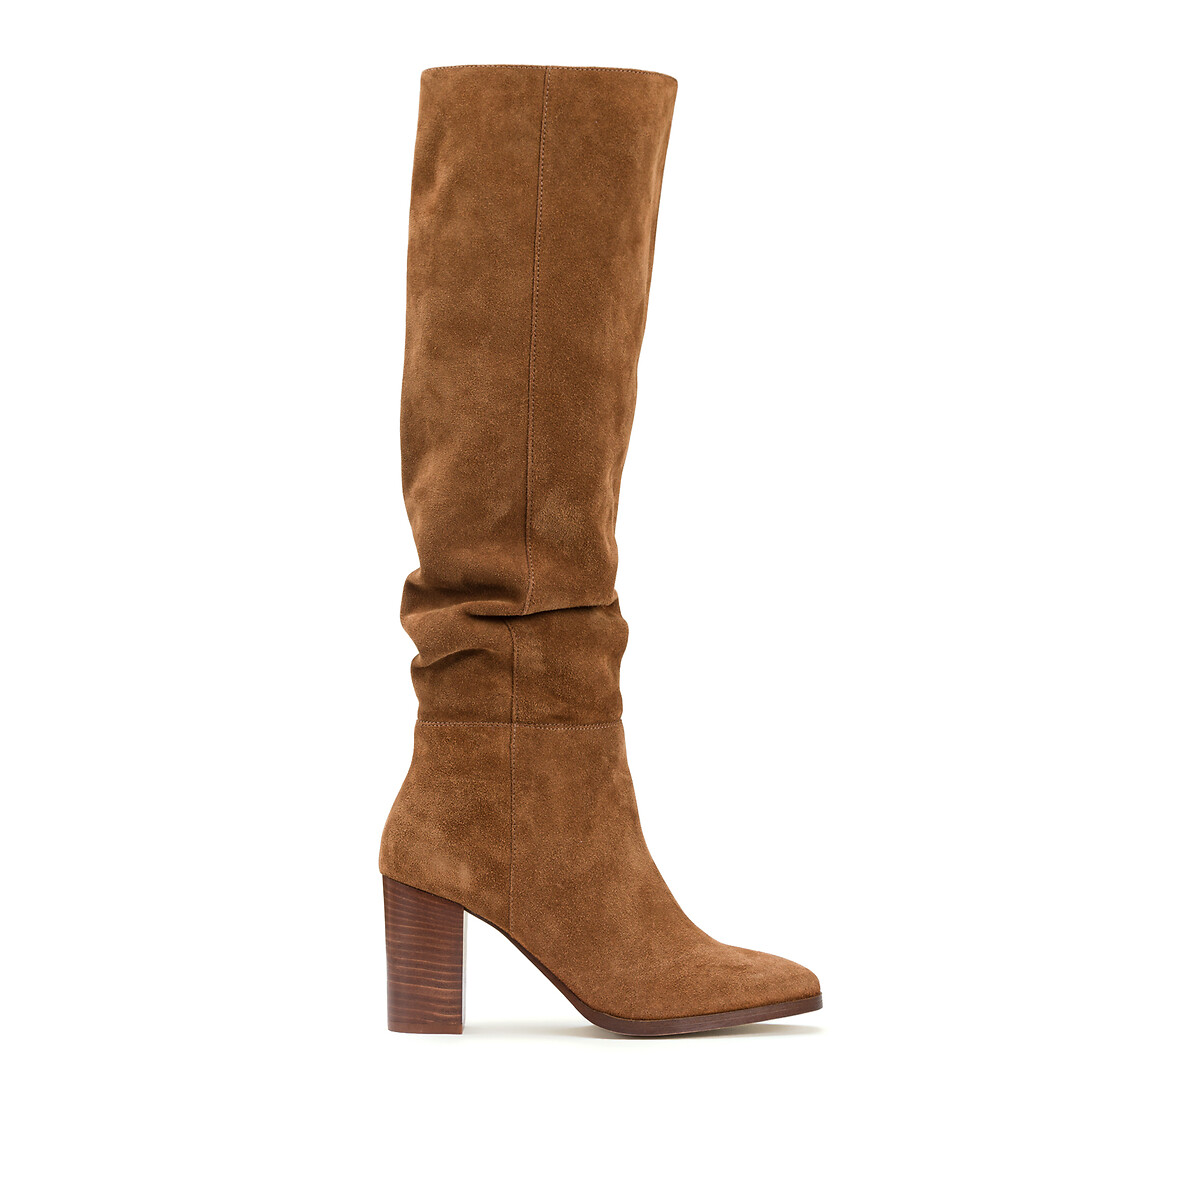 Suede Knee-High Boots with Block Heel, Made in Europe